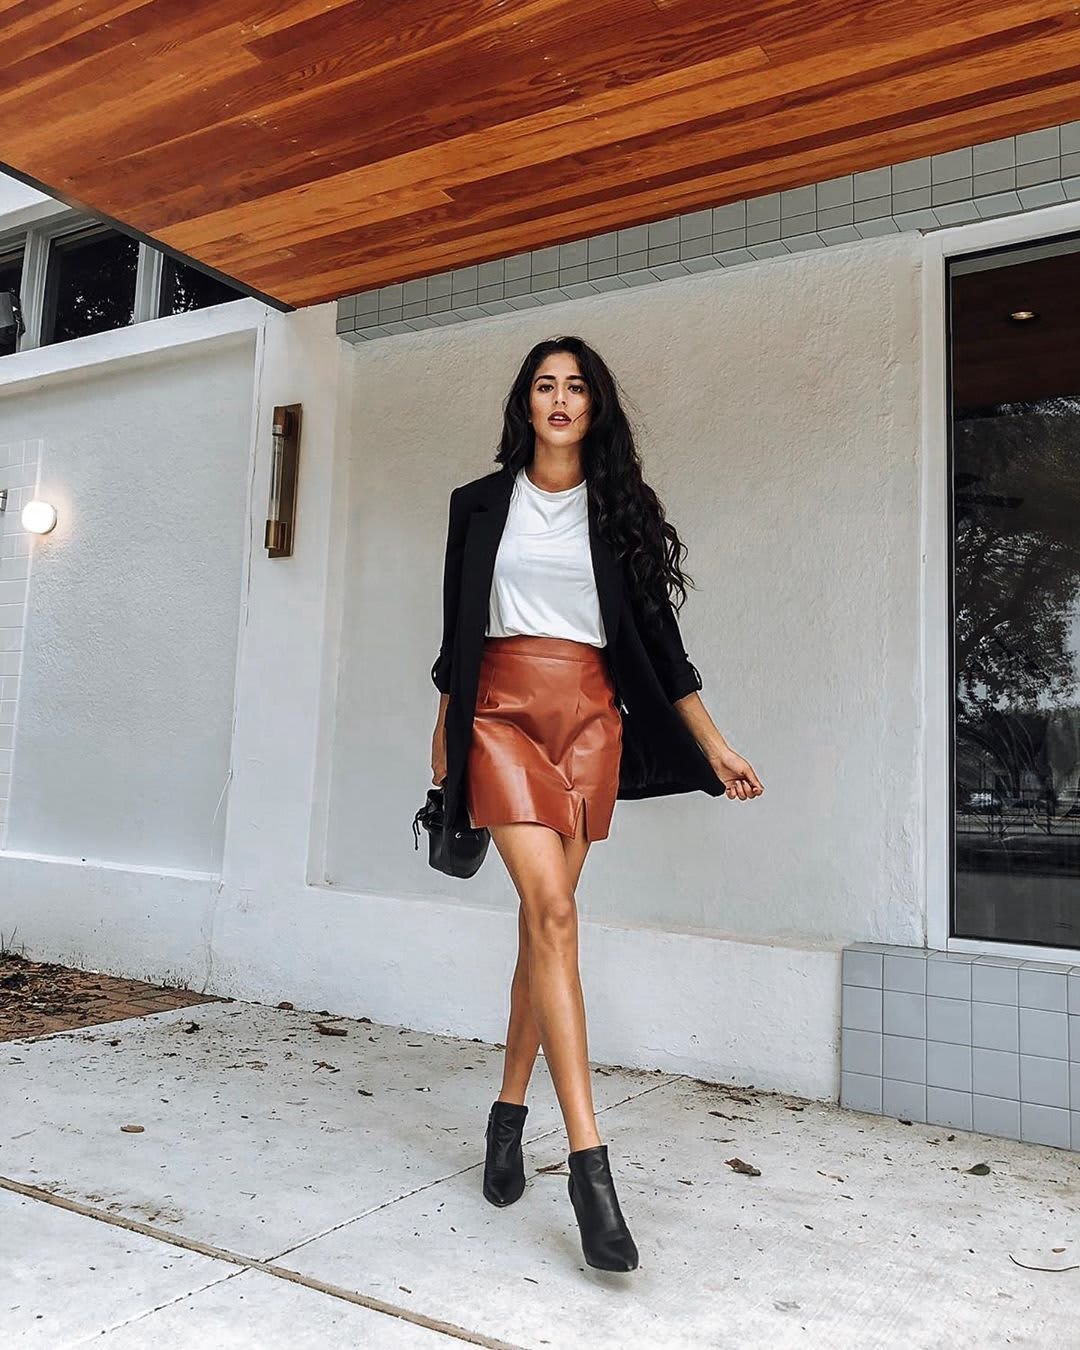 Fall Style Guide: A Skirt for Fall - The Small Things Blog